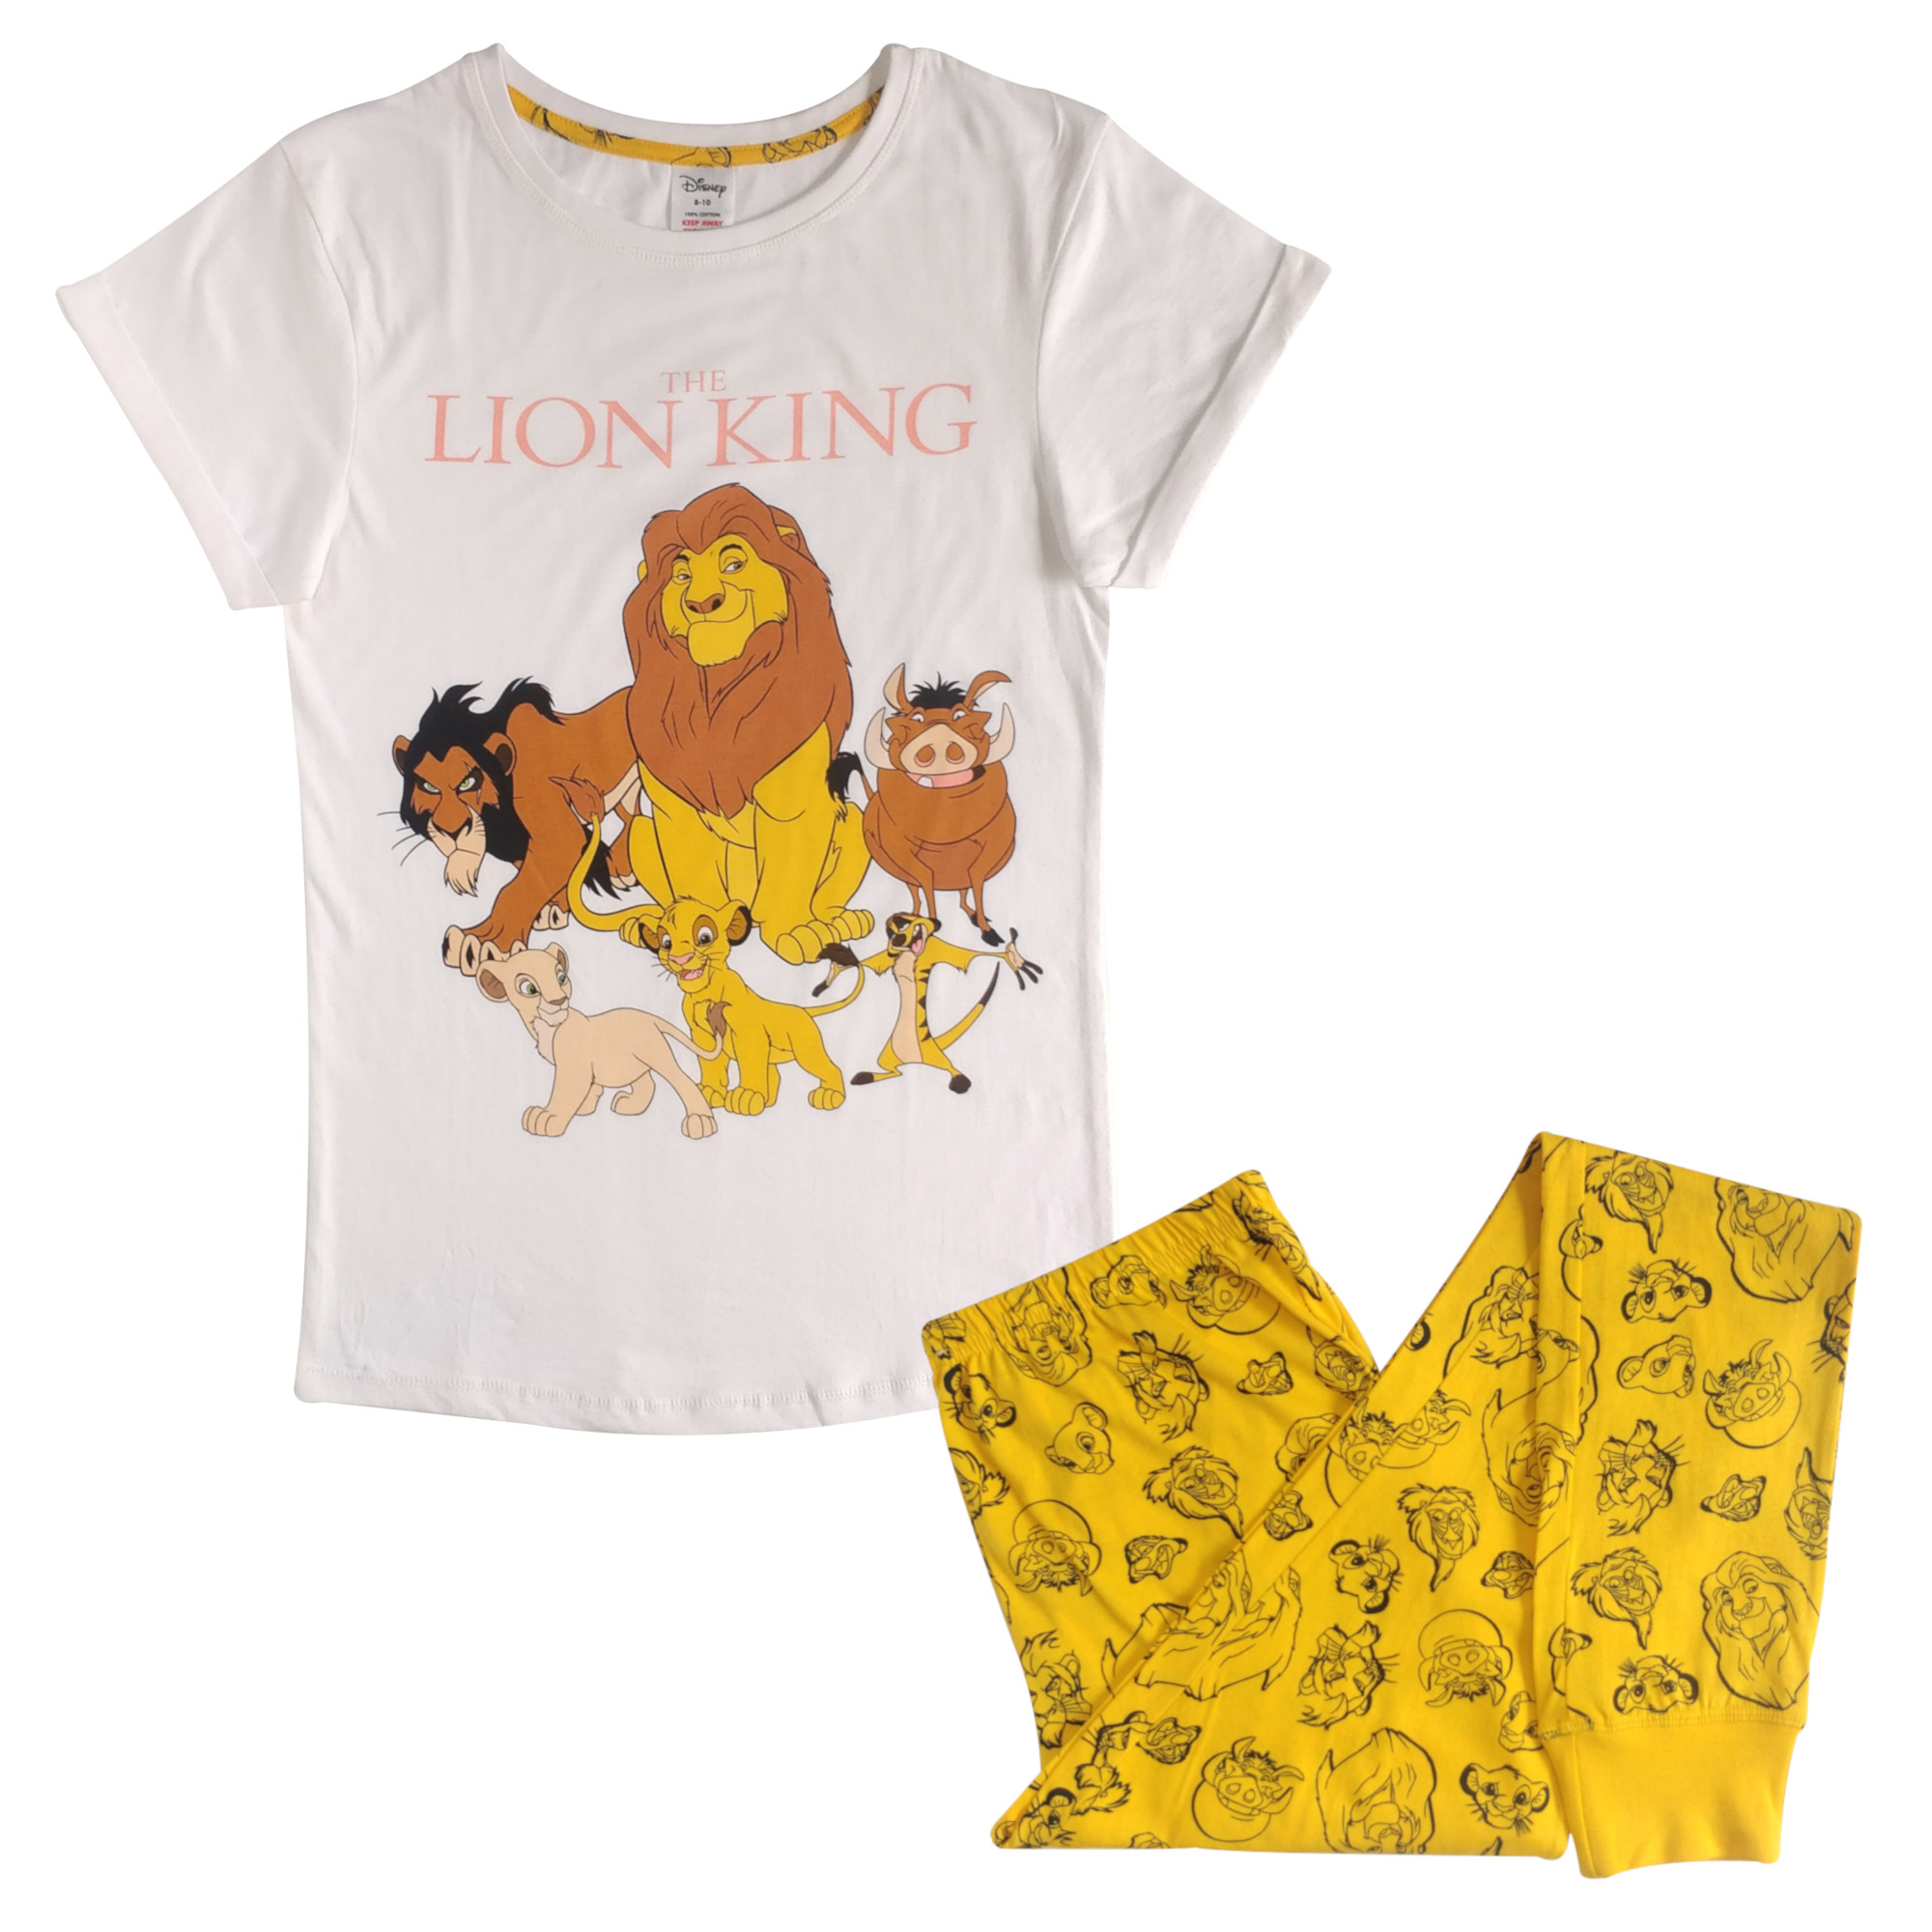 Disney | The Lion King Pyjamas | Women's Lounge Wear from World of Fables